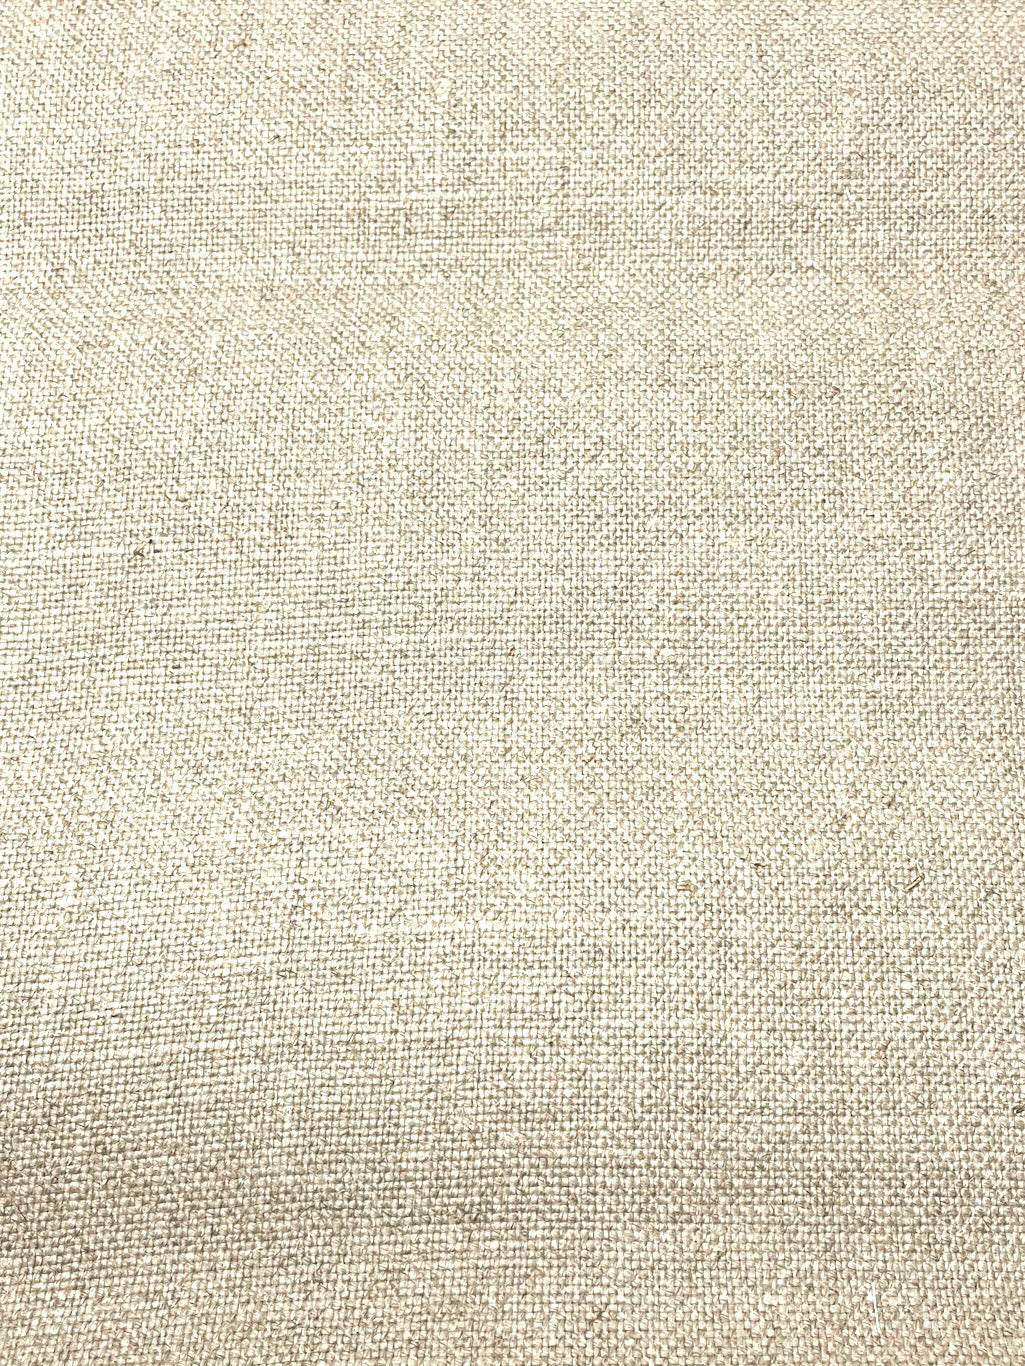 Medium Heavy Weight 100% Linen Fabric By The Yard, Curtain, Drapery, Table Top, 54" Width/CL1100